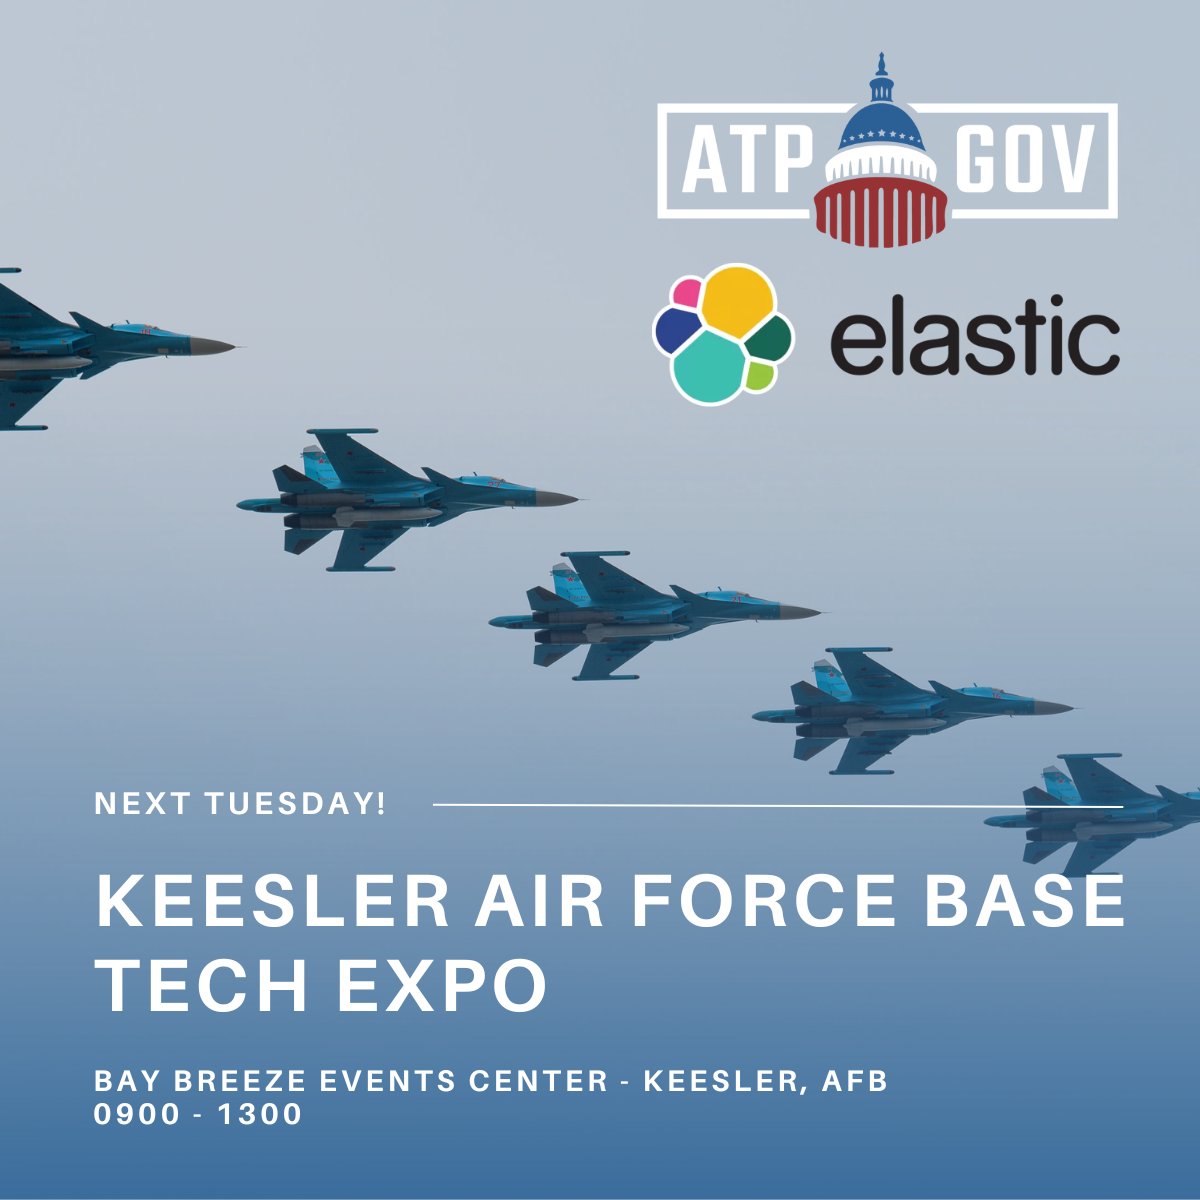 Next Tuesday, @ATPGov is teaming up with @Elastic at the Keesler Air Force Base Tech Expo! Don't miss our dynamic duo as we showcase innovative solutions tailored for the military. See you there!

#ATPGov #Elastic #ProtectOurNation #ATPGovPartner #TechExpo #KeeslerAFB